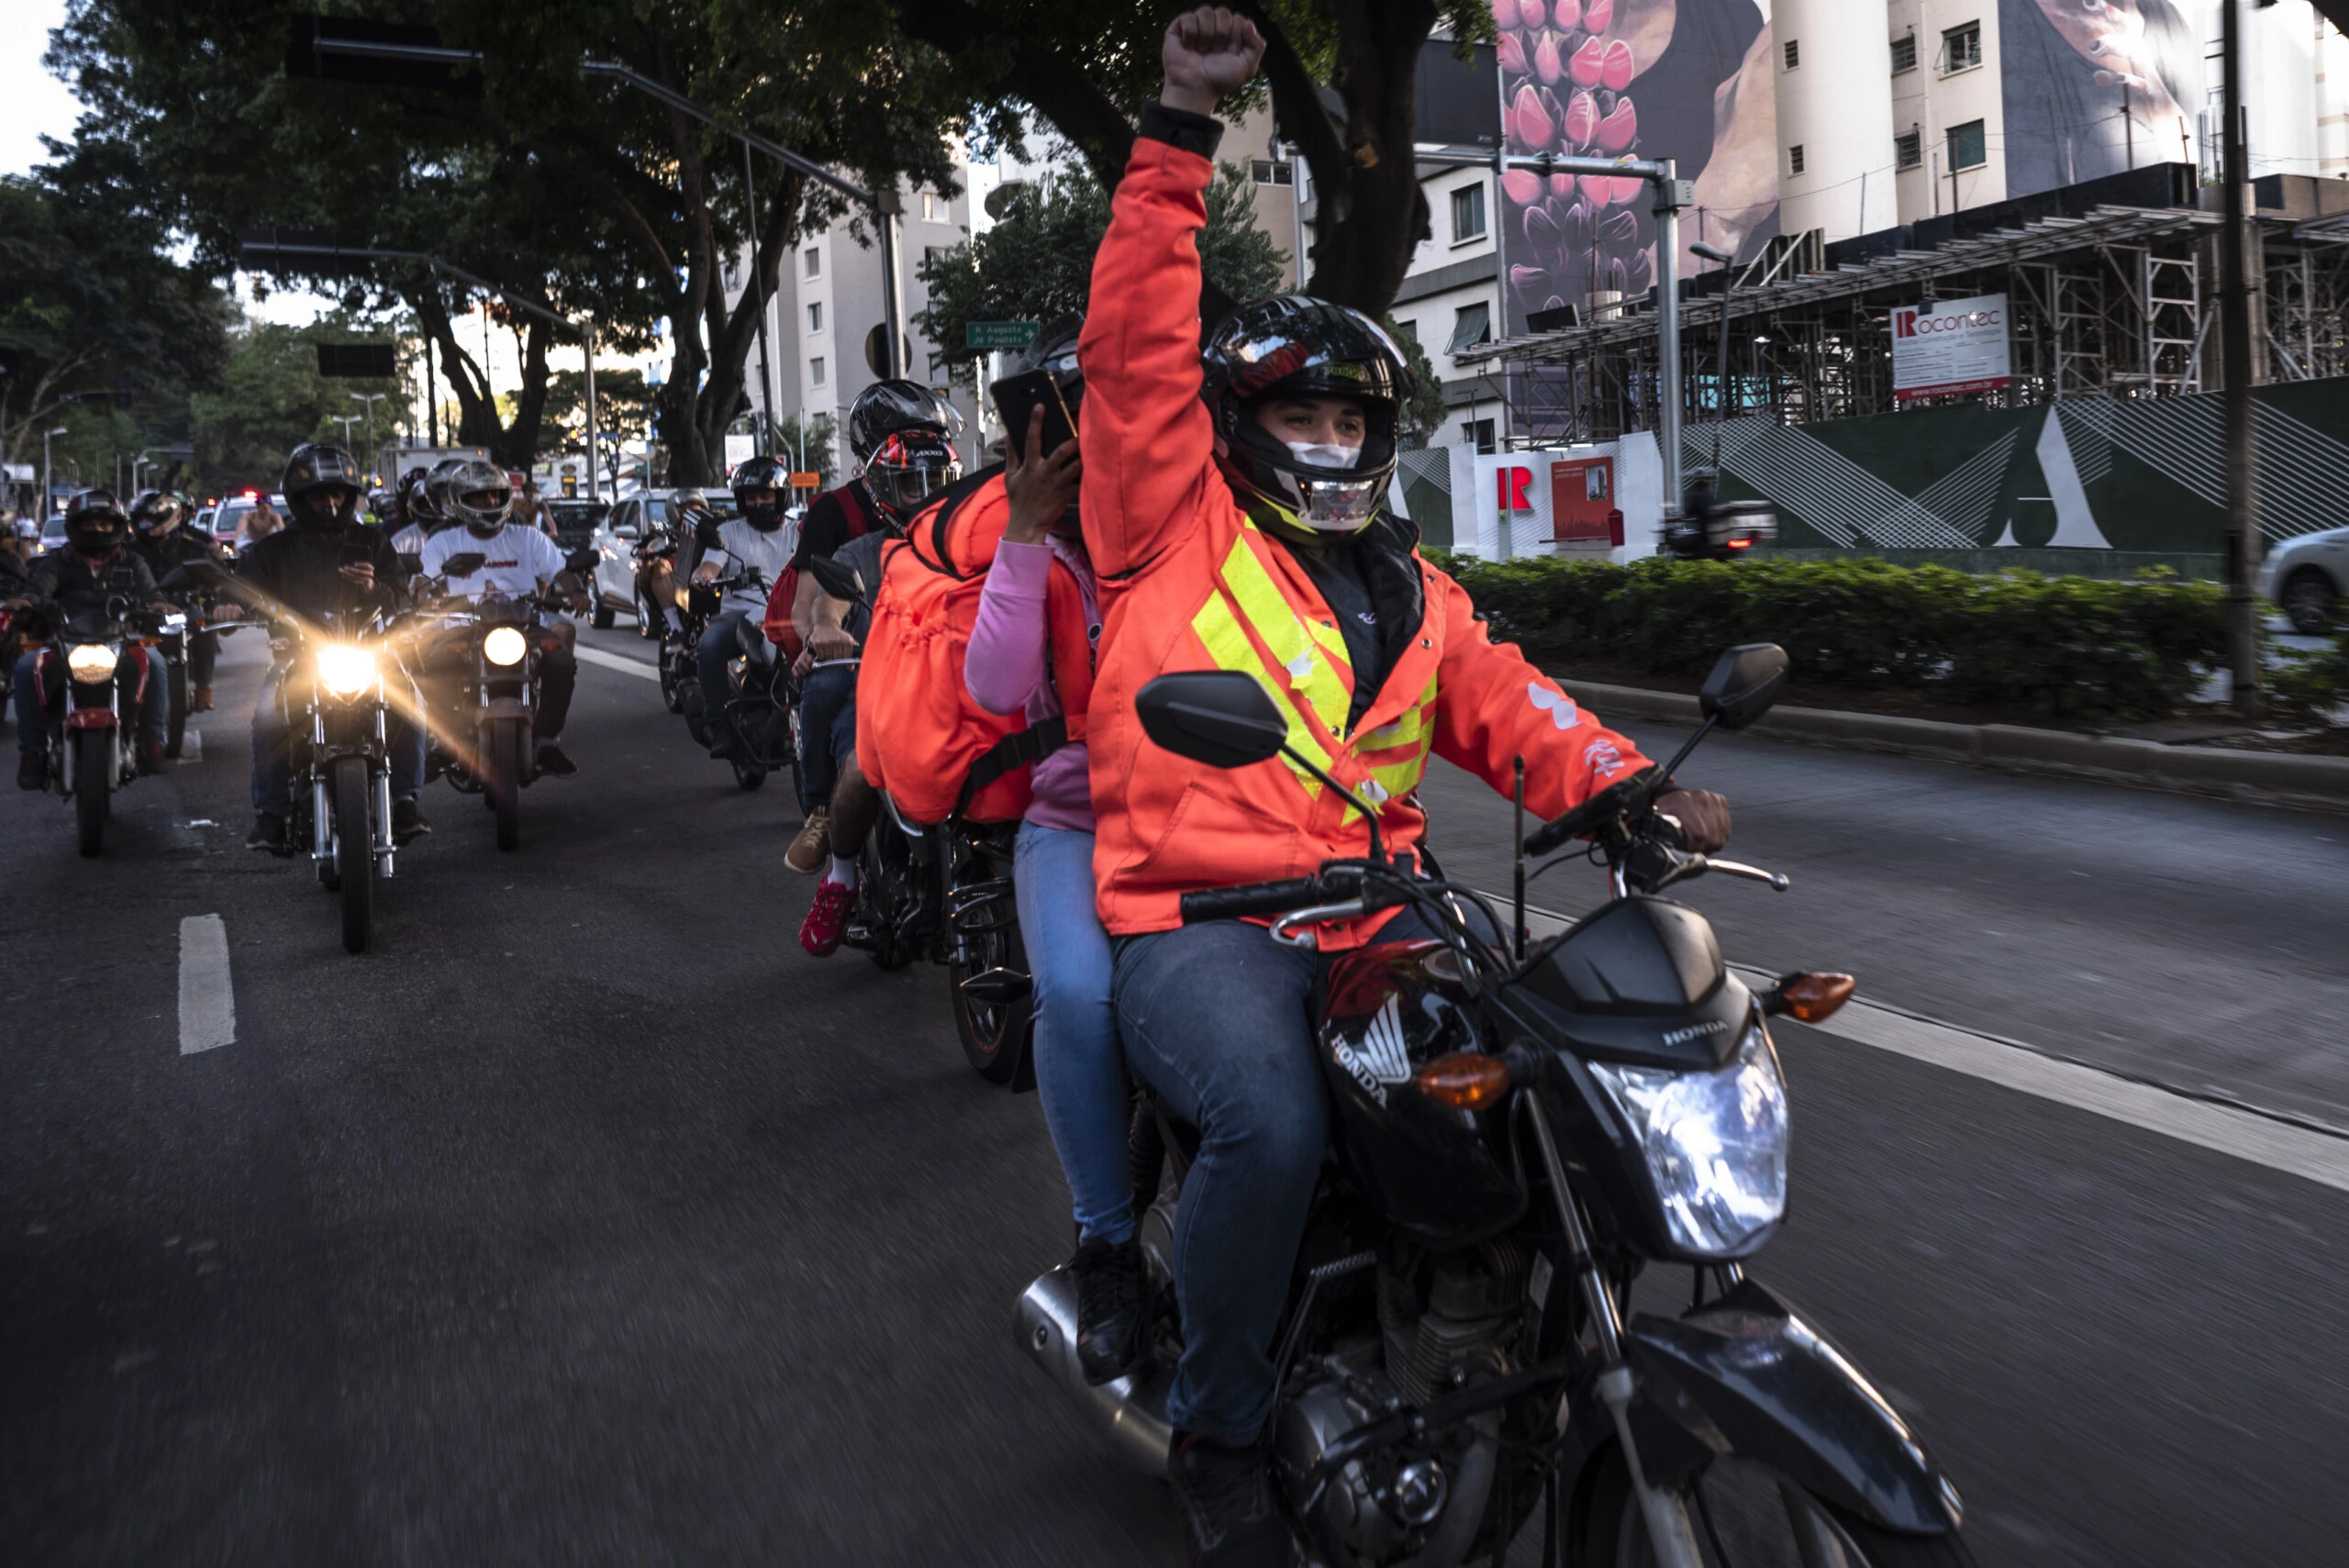 Moto Couriers Strike And Protest In Sao Paulo